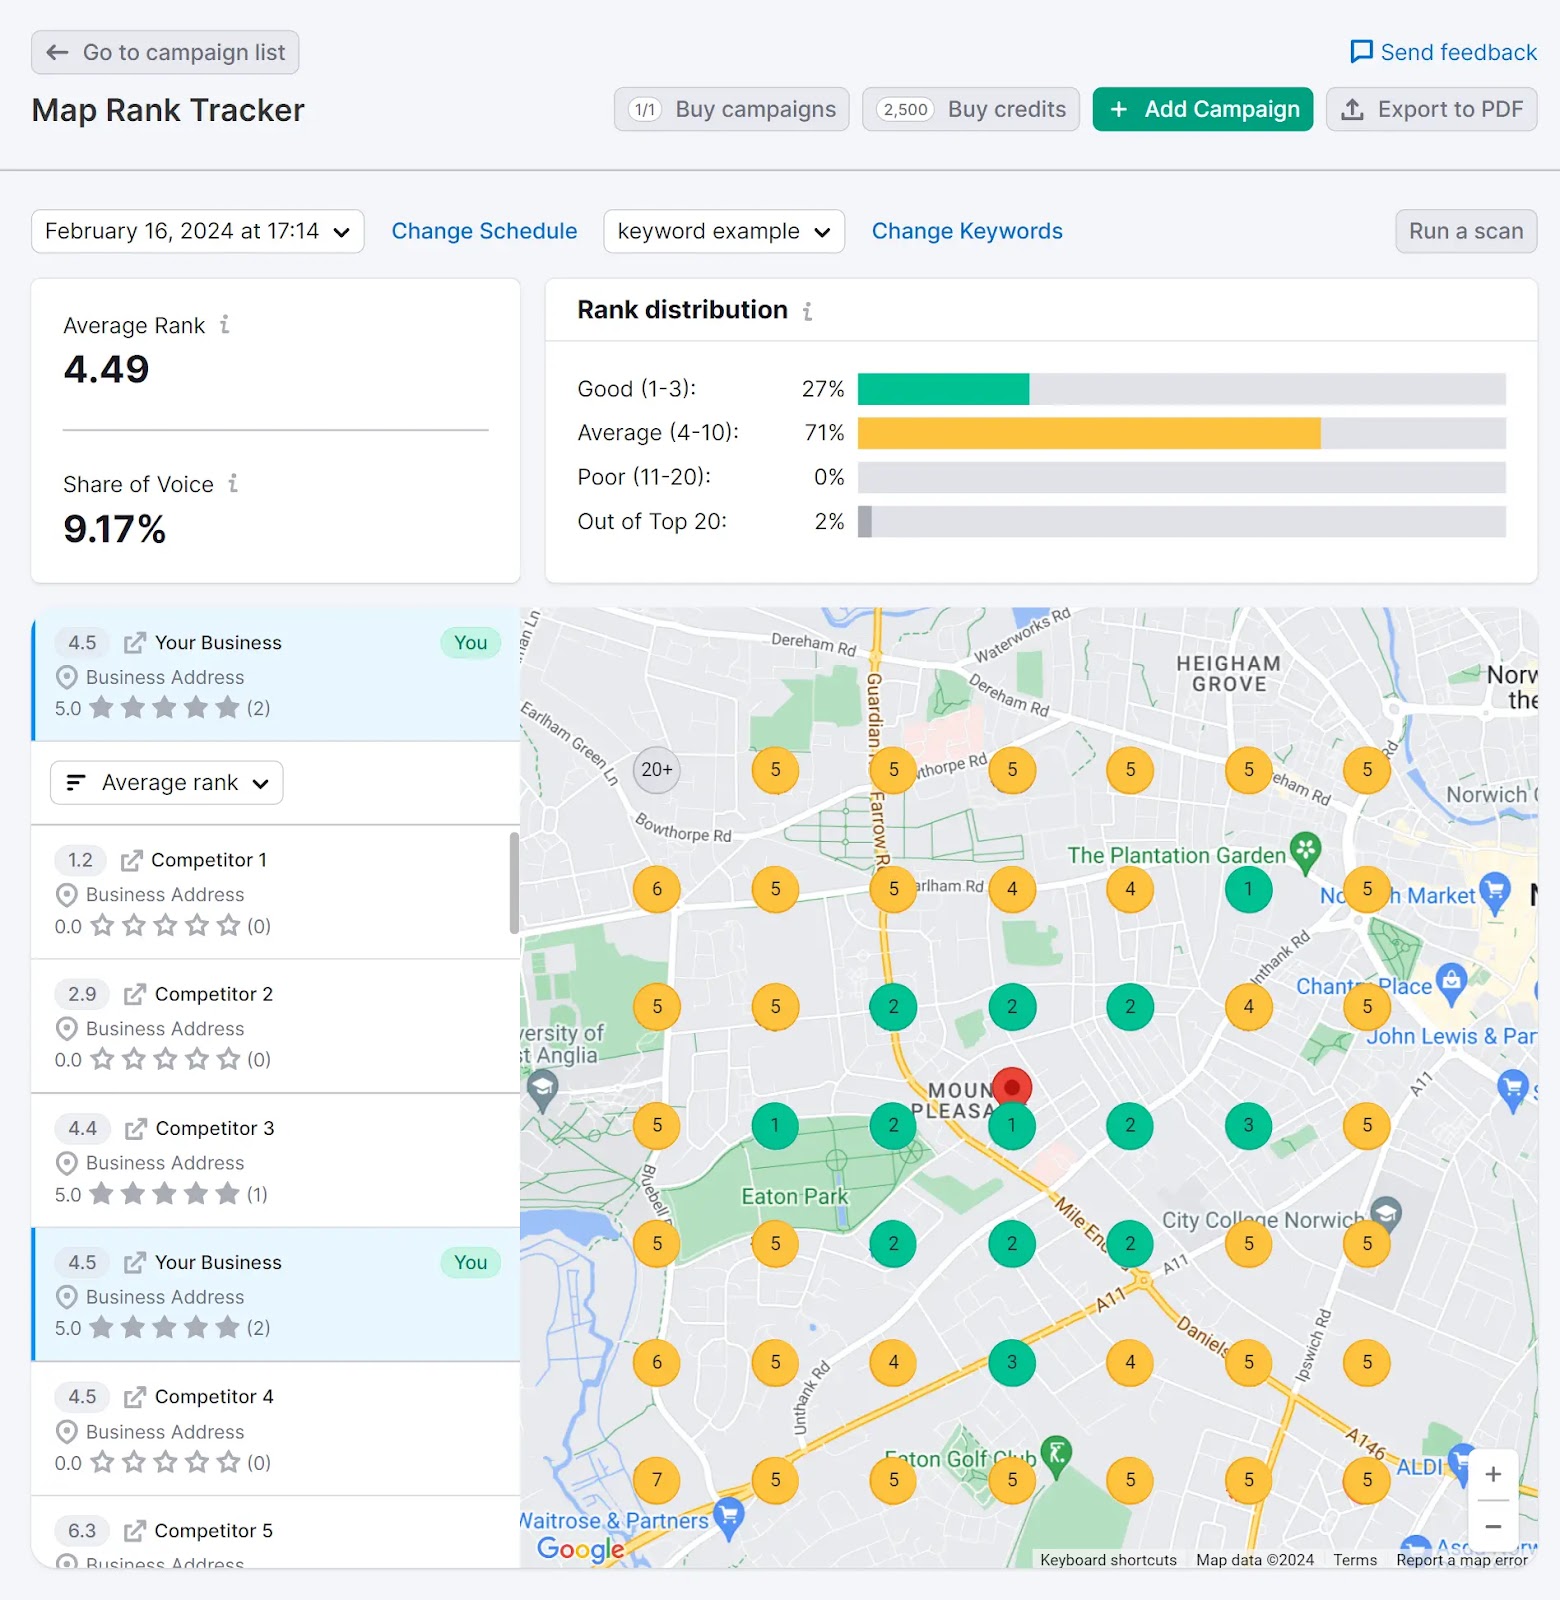 Map Rank Tracker tool interface showing rankings for a business and its competitors on a map.